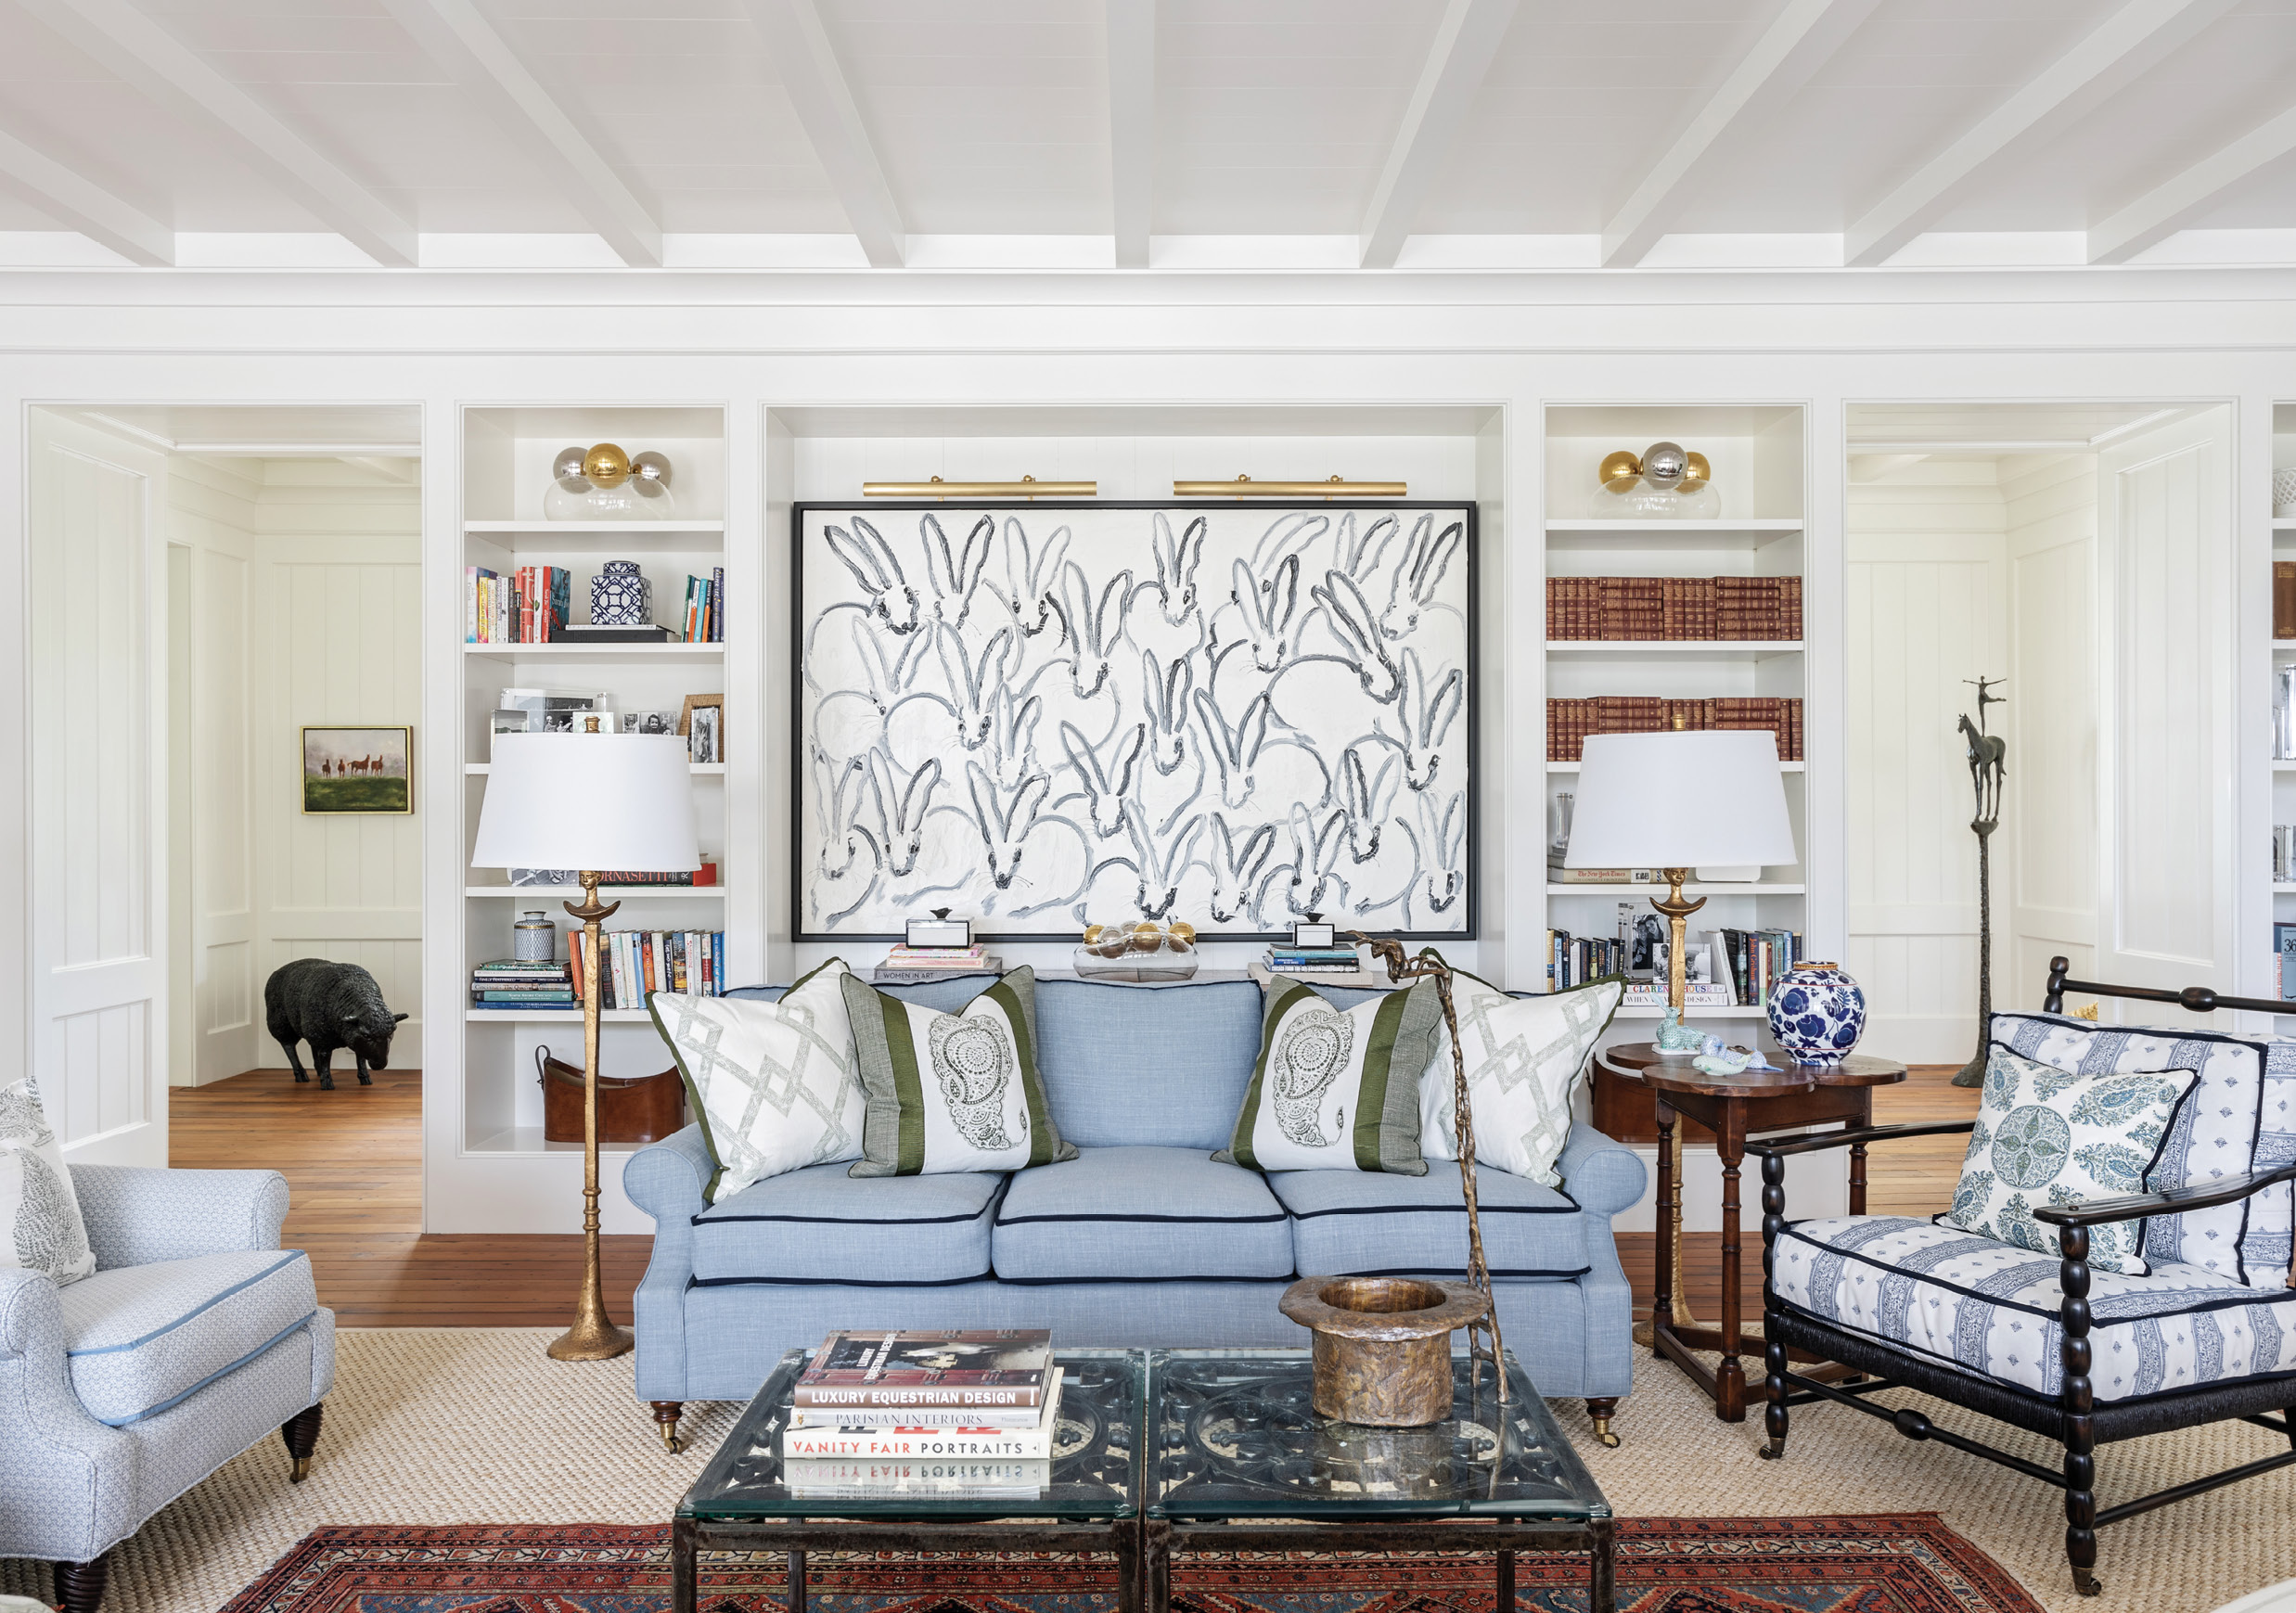 The architects designed spaces for the client’s artwork, such as this built-in made for Hunt Slonem’s Bunnies. Interior designer Melissa Ervin designed the living room to be comfortable and livable with a green and blue color palette playing on the natural scene beyond its large windows. The Edward Ferrell sofa is covered in CalvinFabric’s “Camino-Lake,” tipped with grosgrain ribbon, a small detail with a large impact.